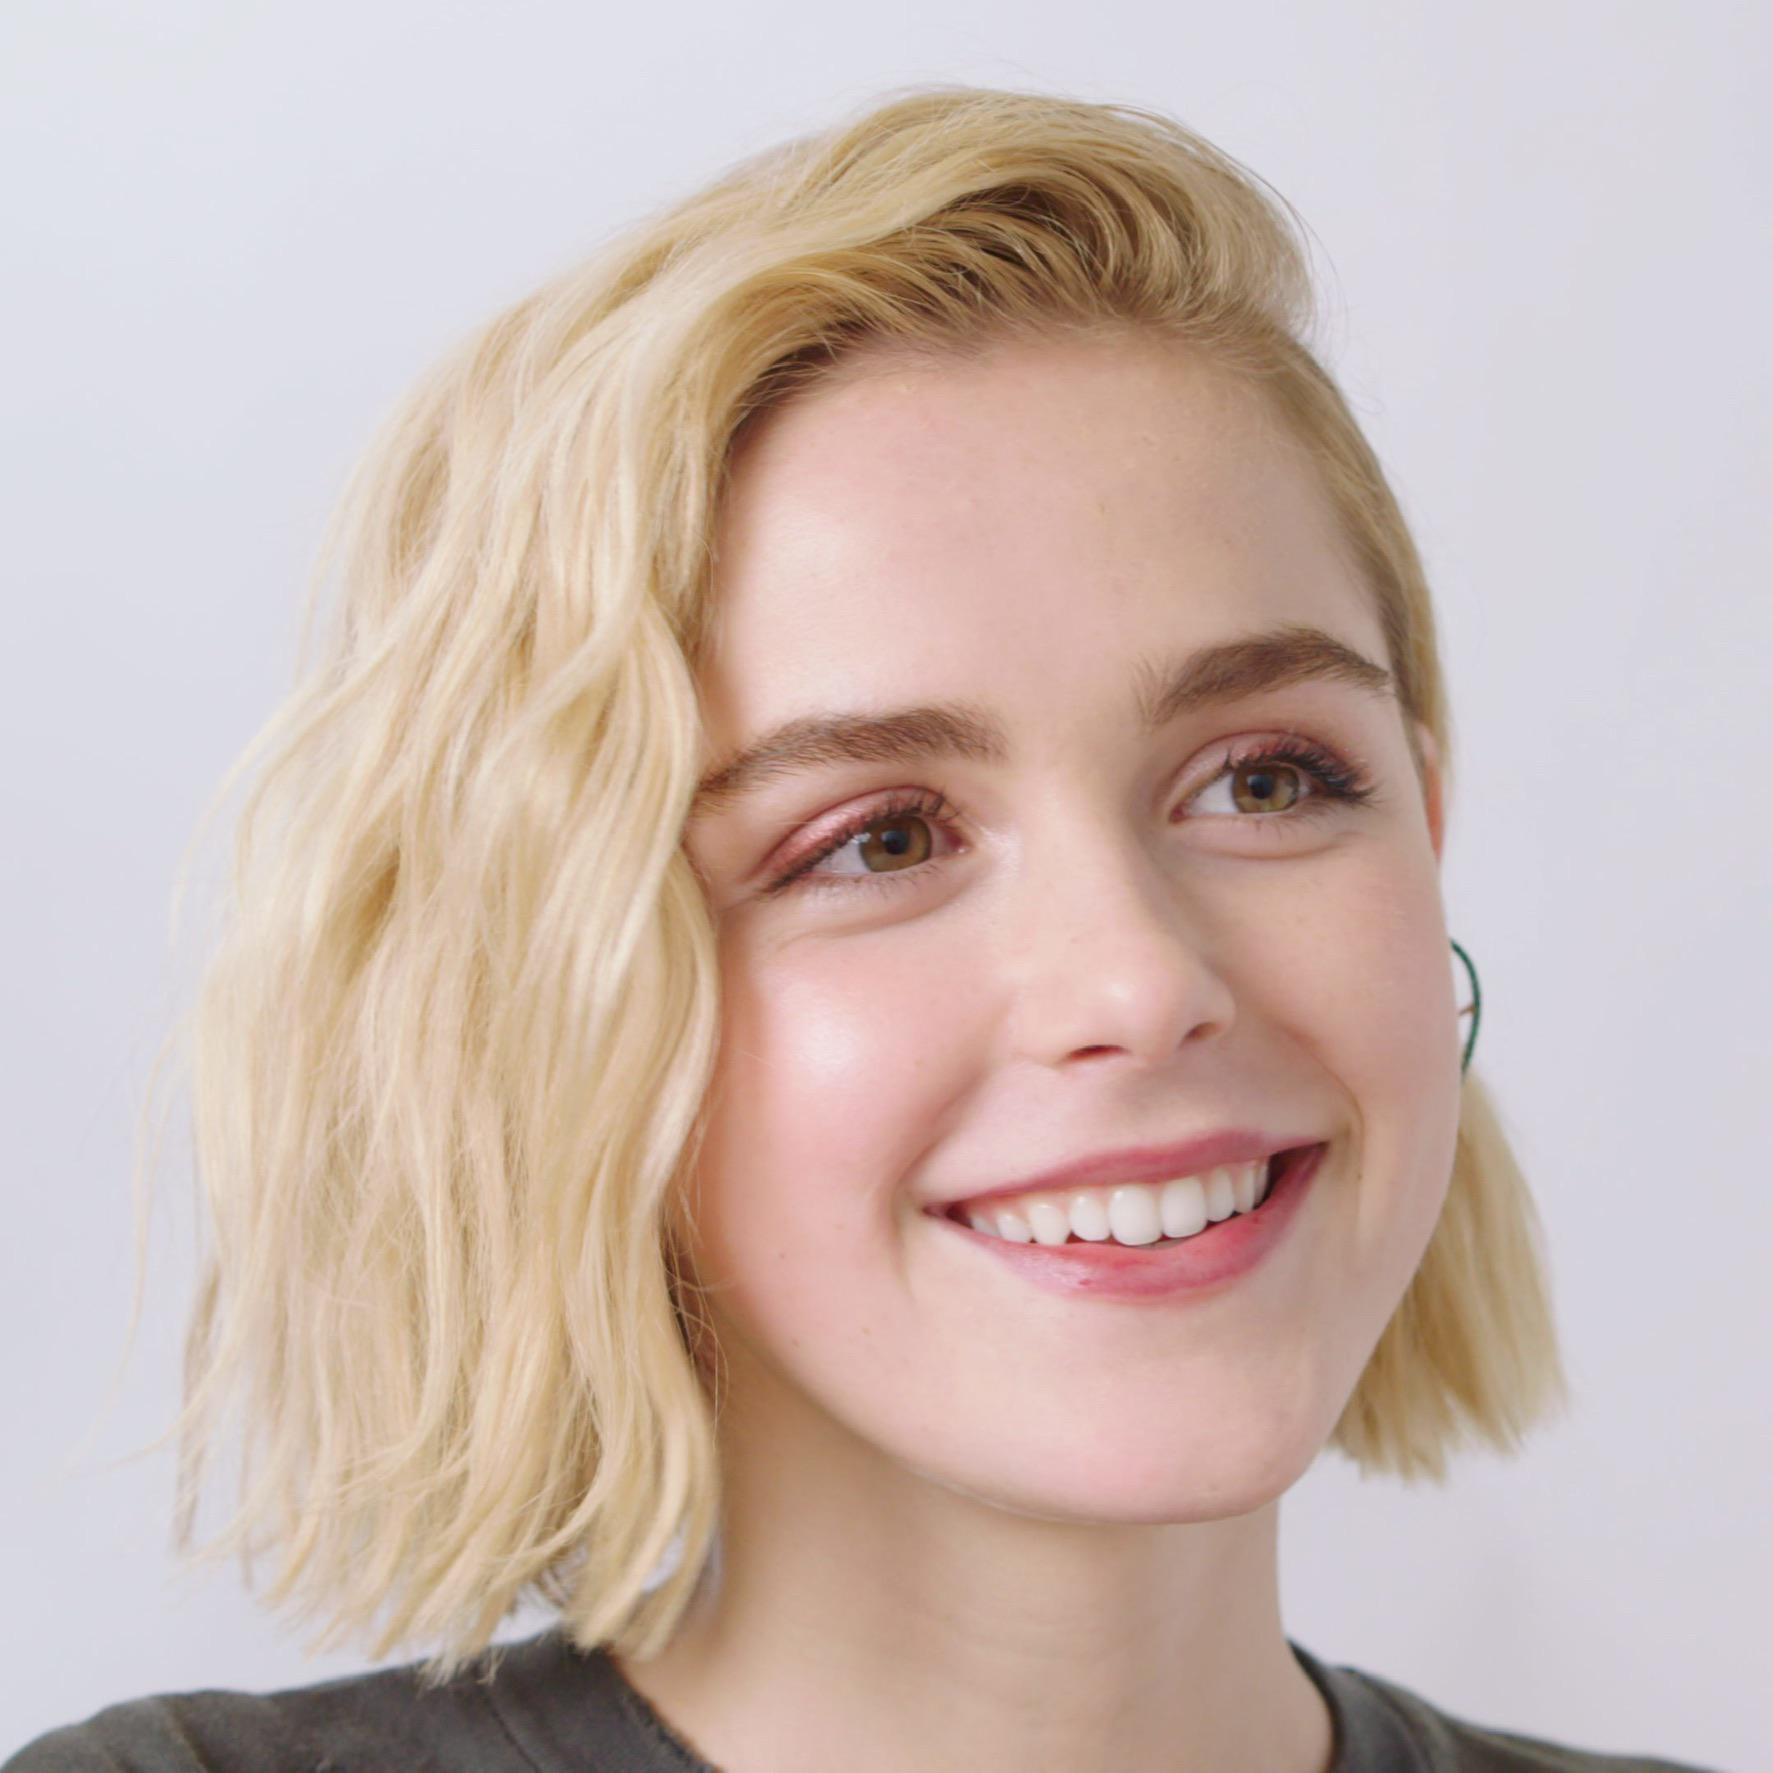 The Perfect Cum Target How Would You Use Kiernan Shipka Before She Gets Your Cum Scrolller 7760